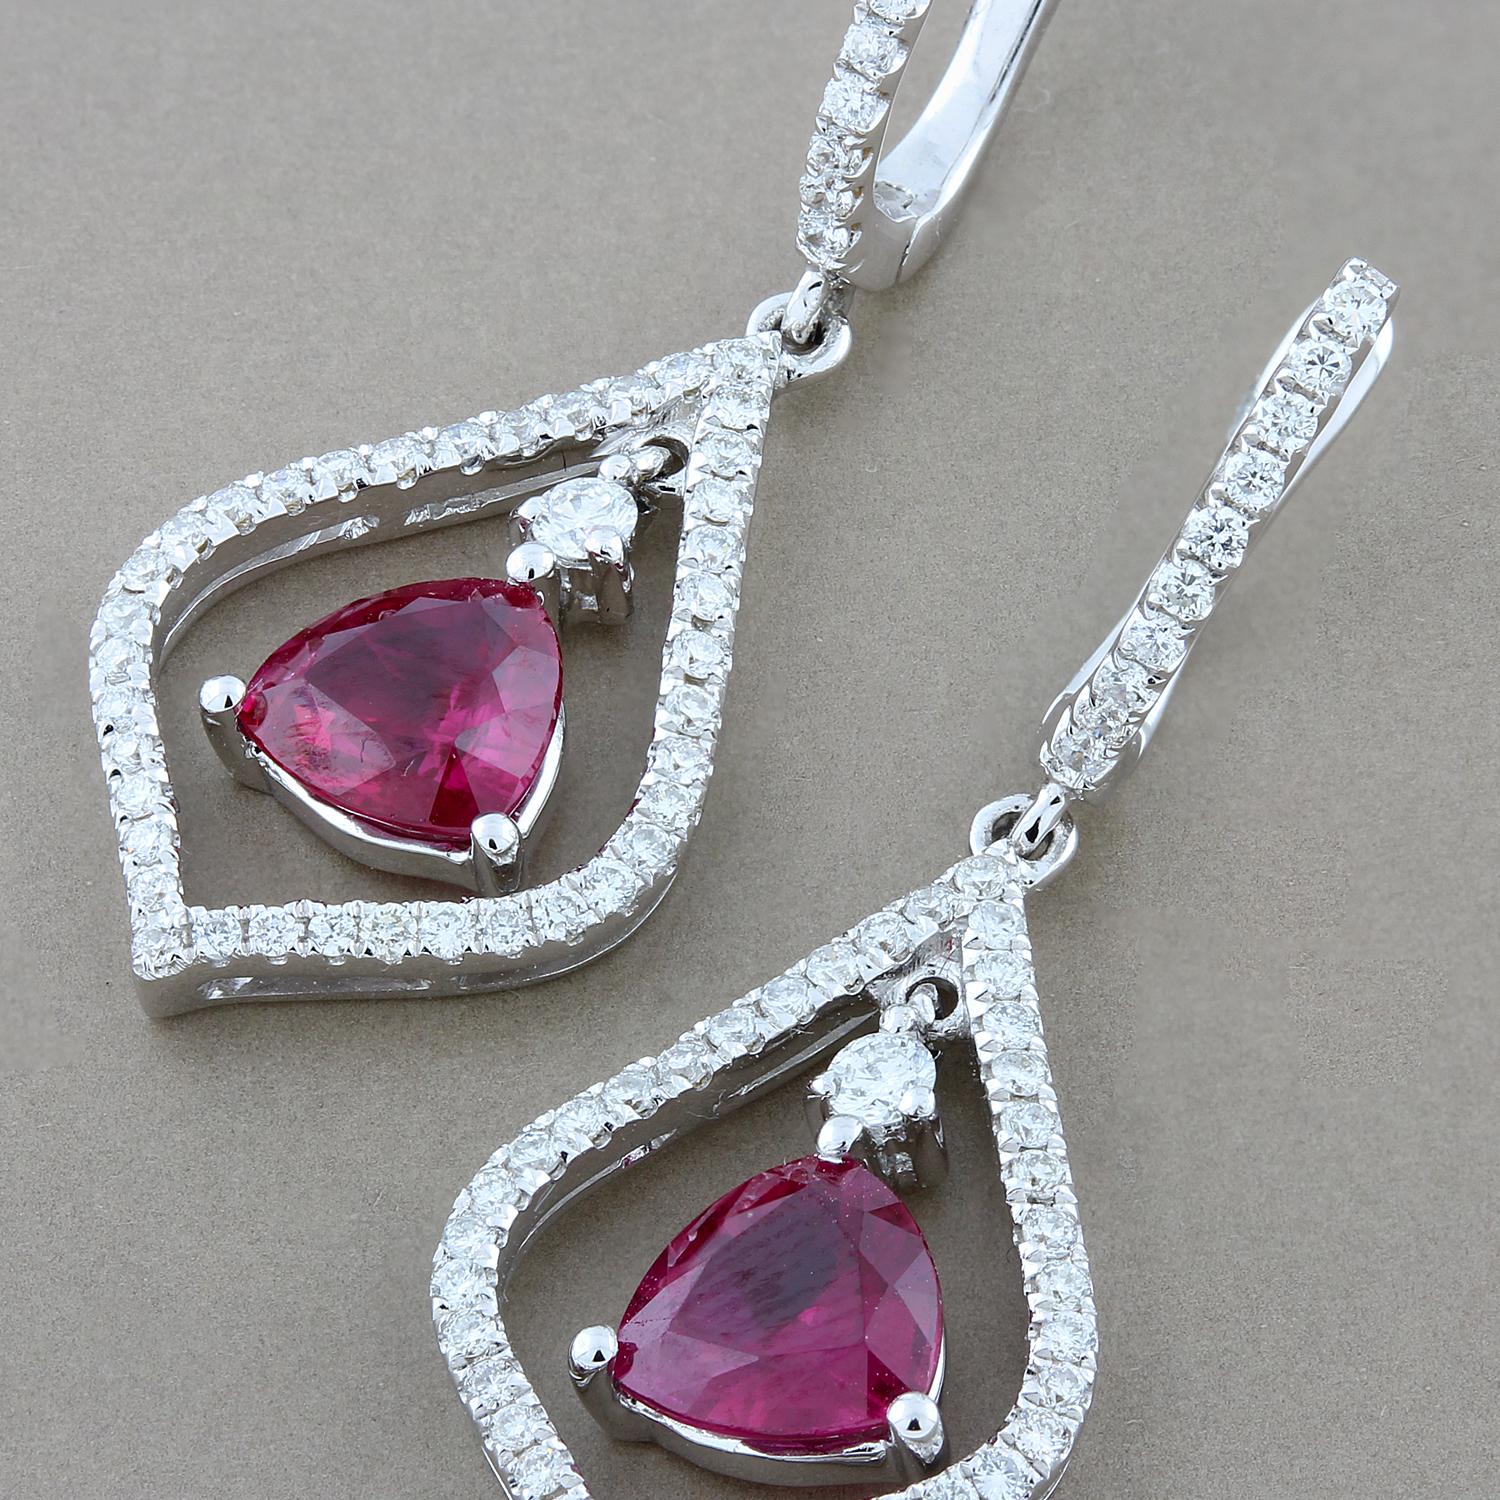 These majestic earrings feature 2.08 carats of fine round cut rubies in a silhouette of 0.70 carats of VS quality diamonds. The rubies have the perfect red color most desired by top gem collectors.  All set in 18K white gold.   

Earring Length: